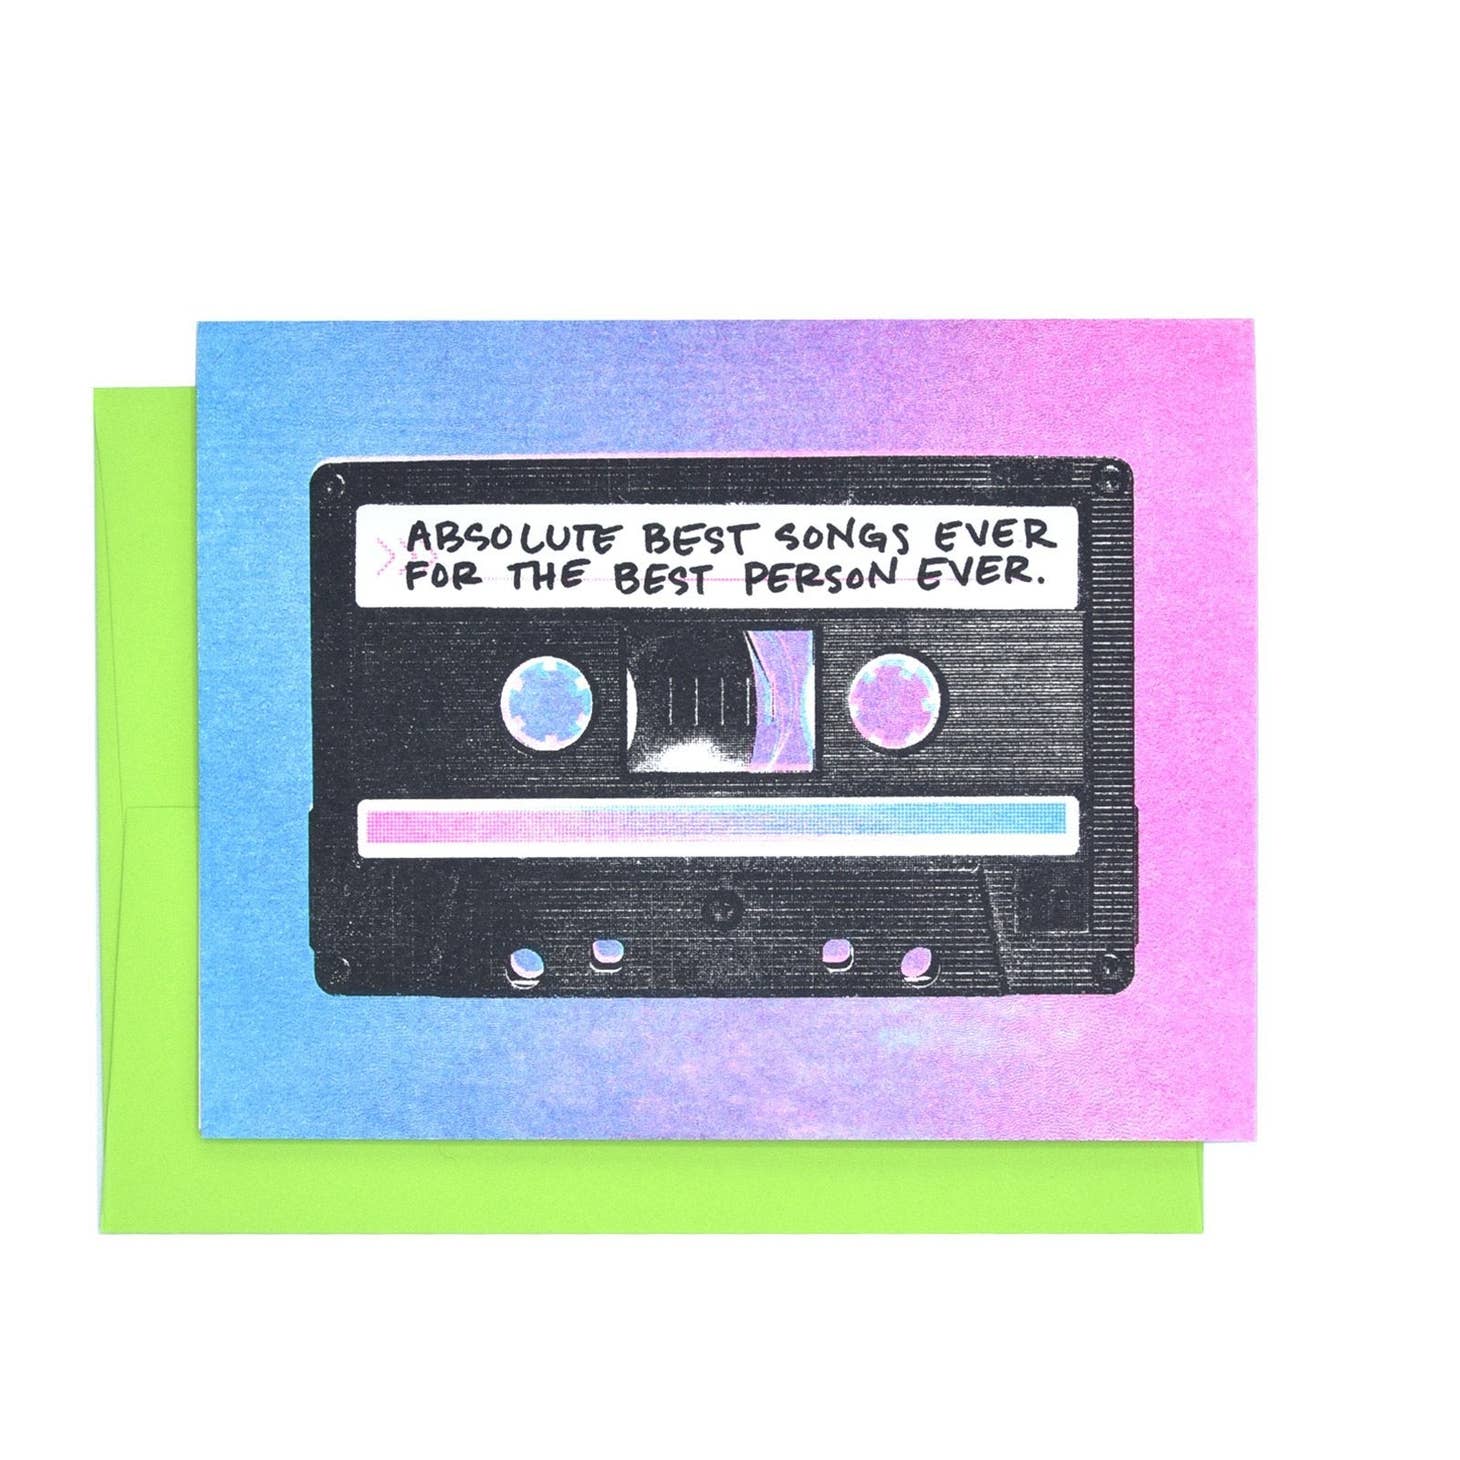 Pink and blue background with image of a black cassette tape with a white label that says in black text “Absolute best songs ever for the best person ever”. Bright green envelope included. 